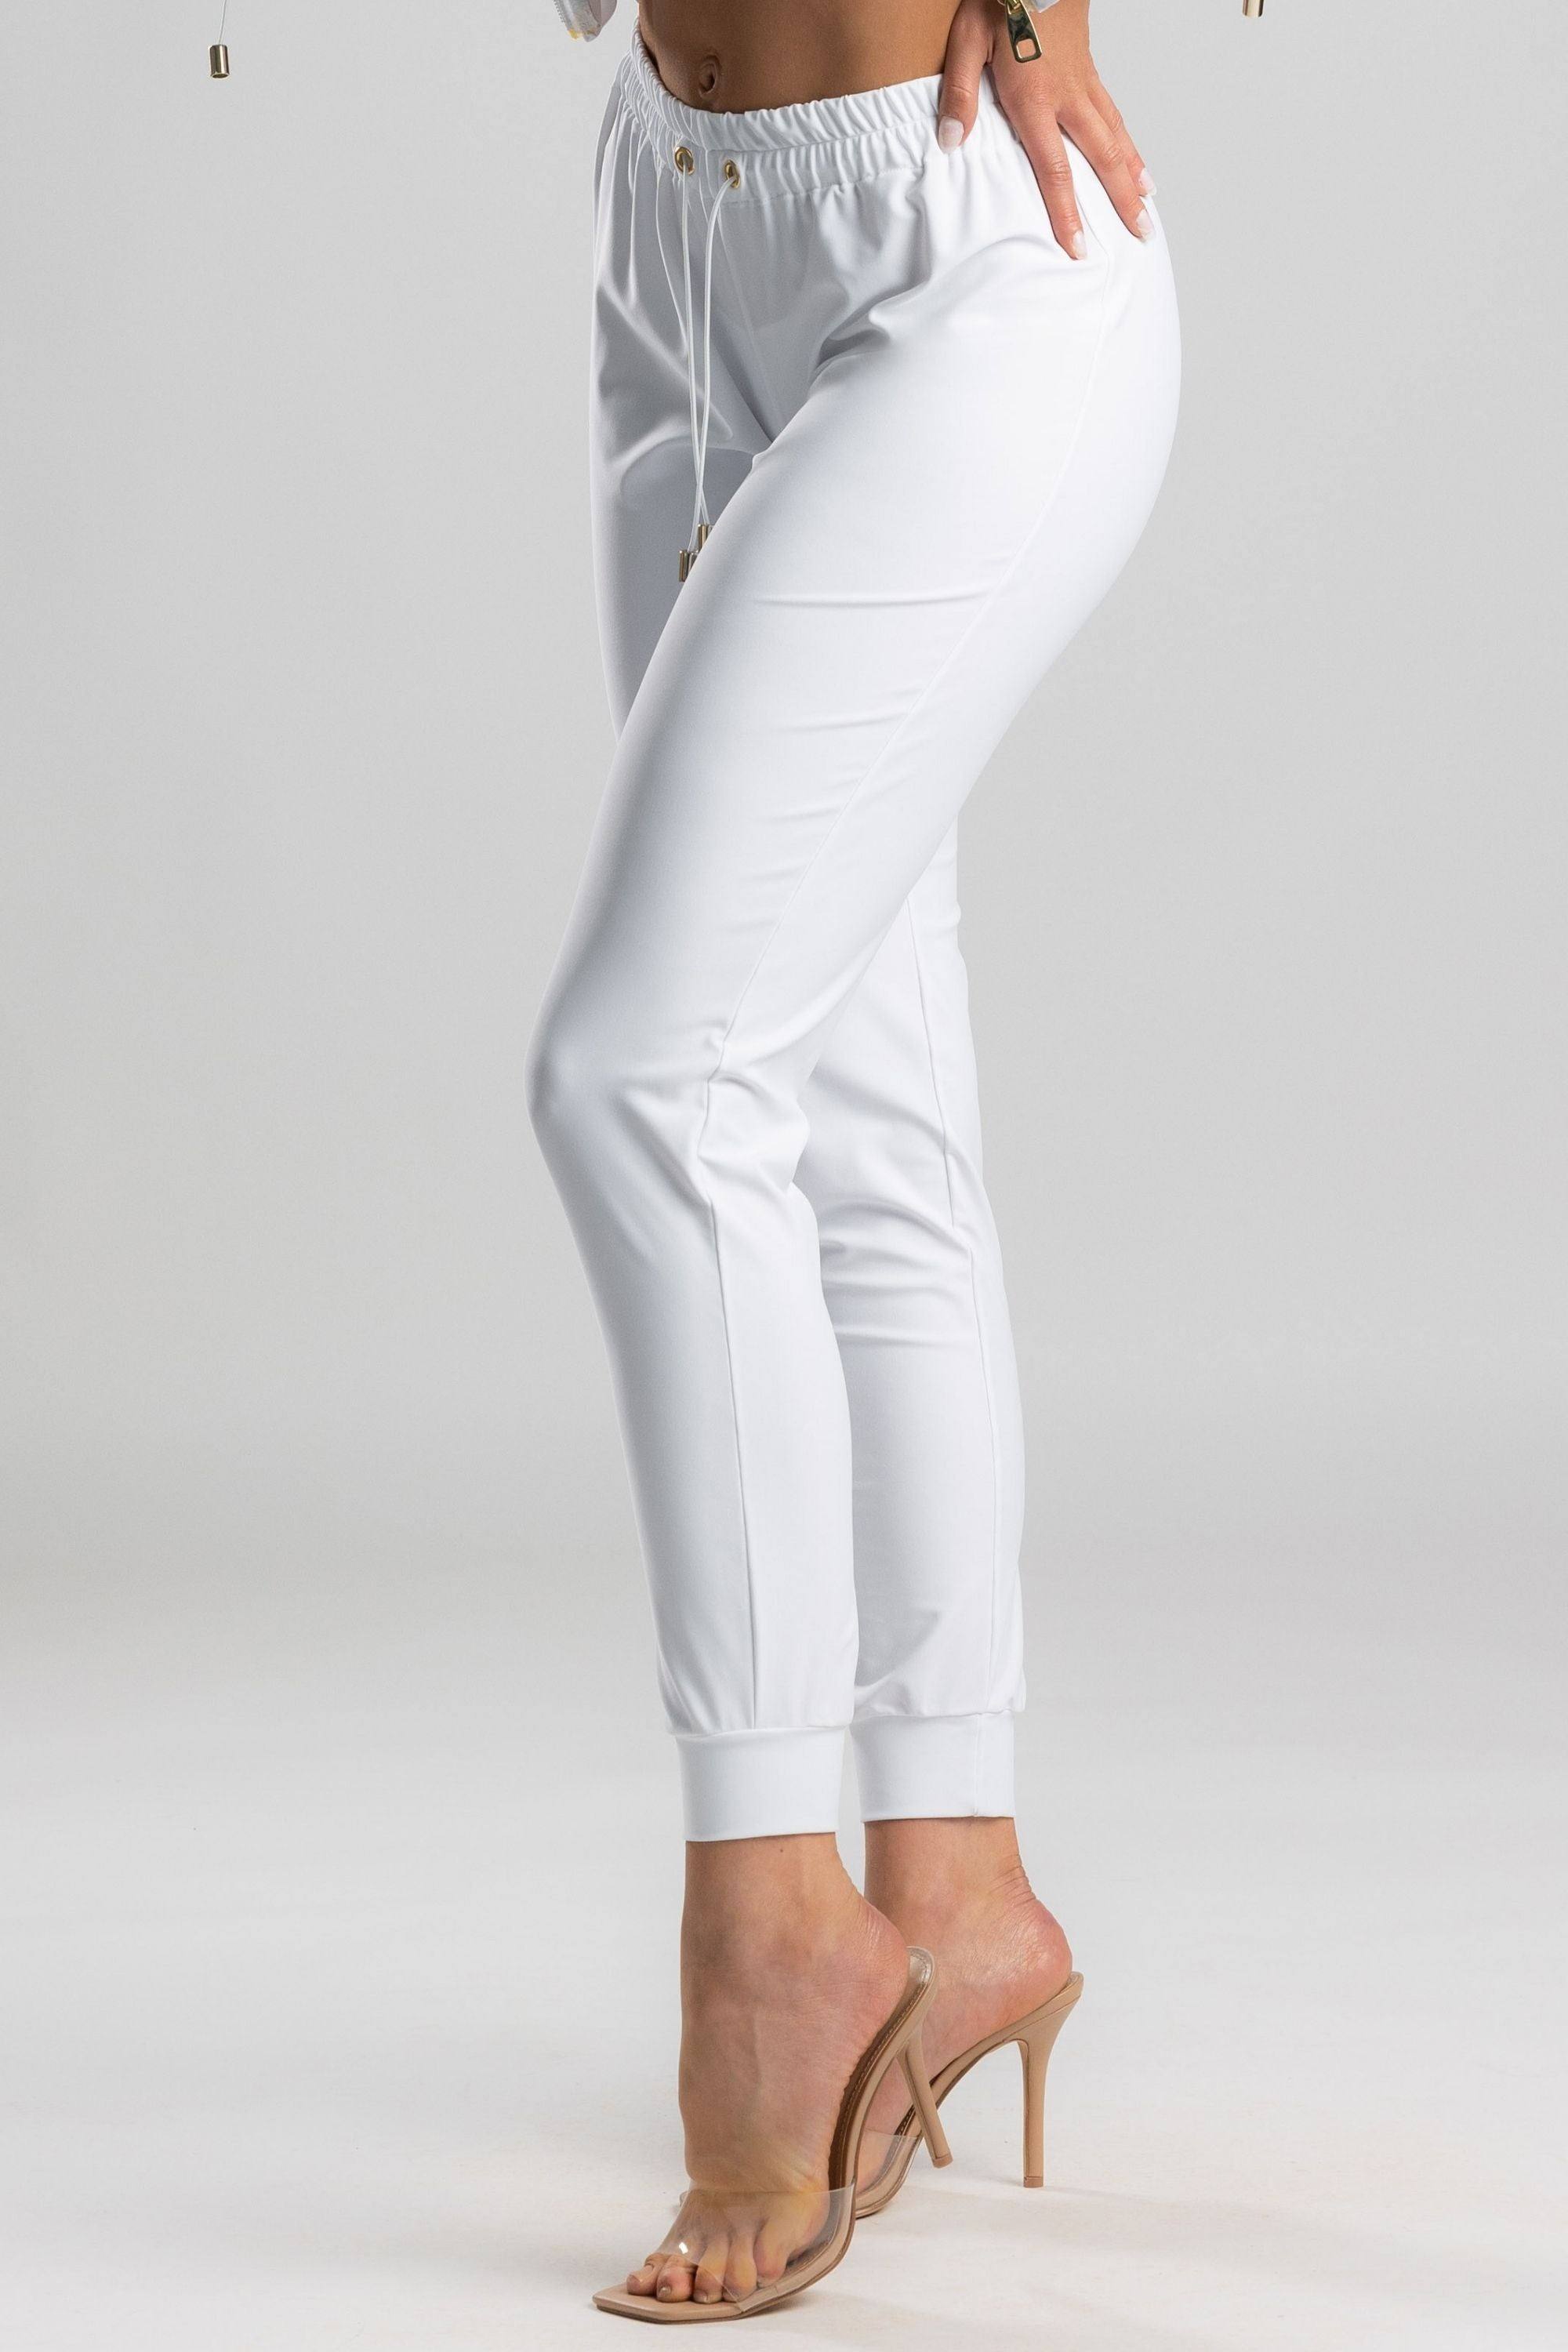 Shop Luxury Designer Pants For Women At Affordable Prices